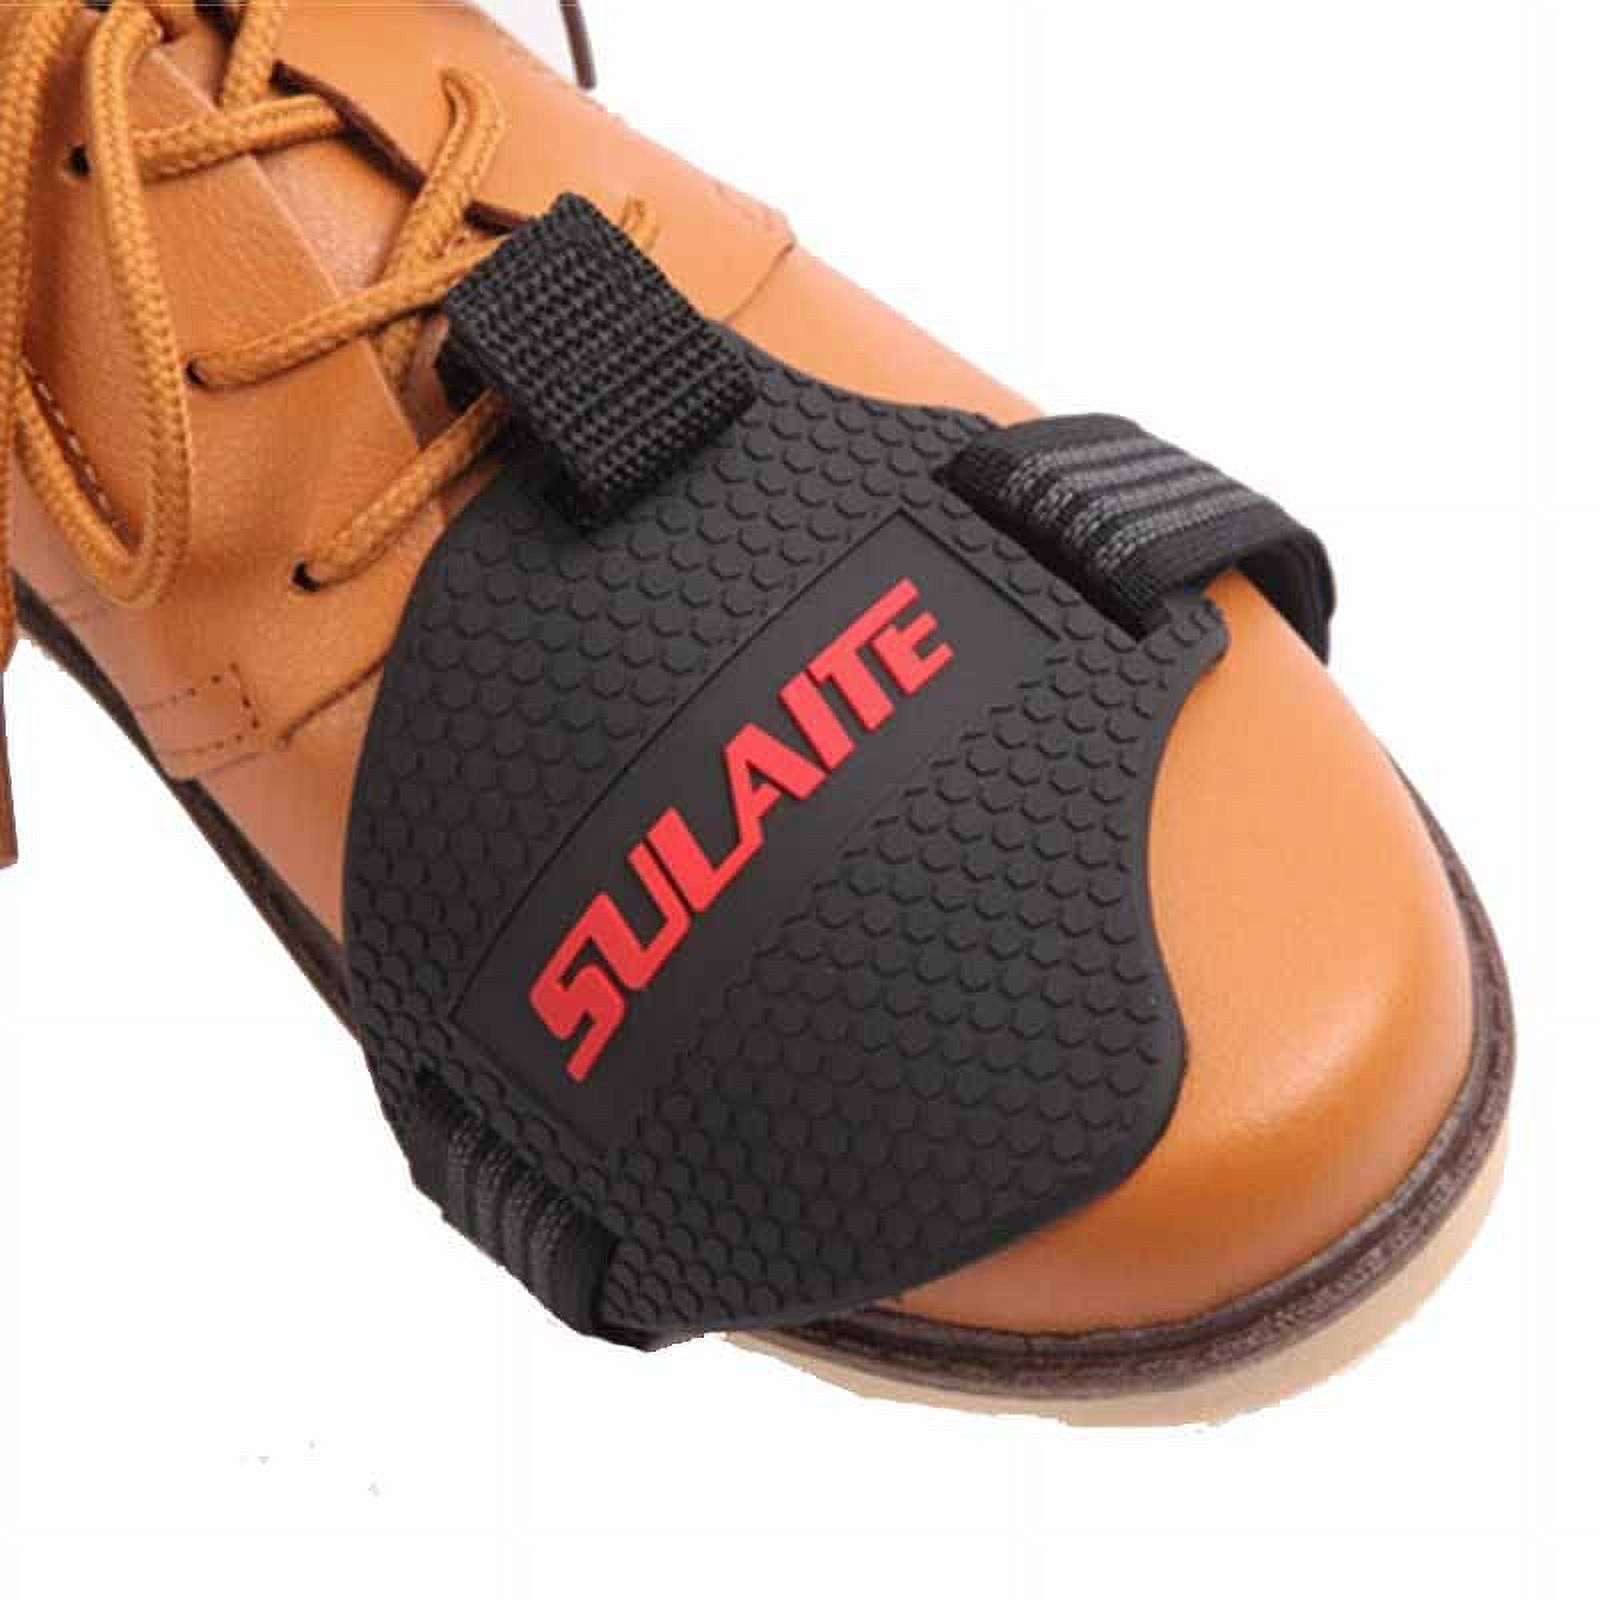 Stronger Rubber Motorcycle Gear Shifter Shoe Boots Protector Shift Motorbike Boot Cover Protective Gear - image 4 of 5